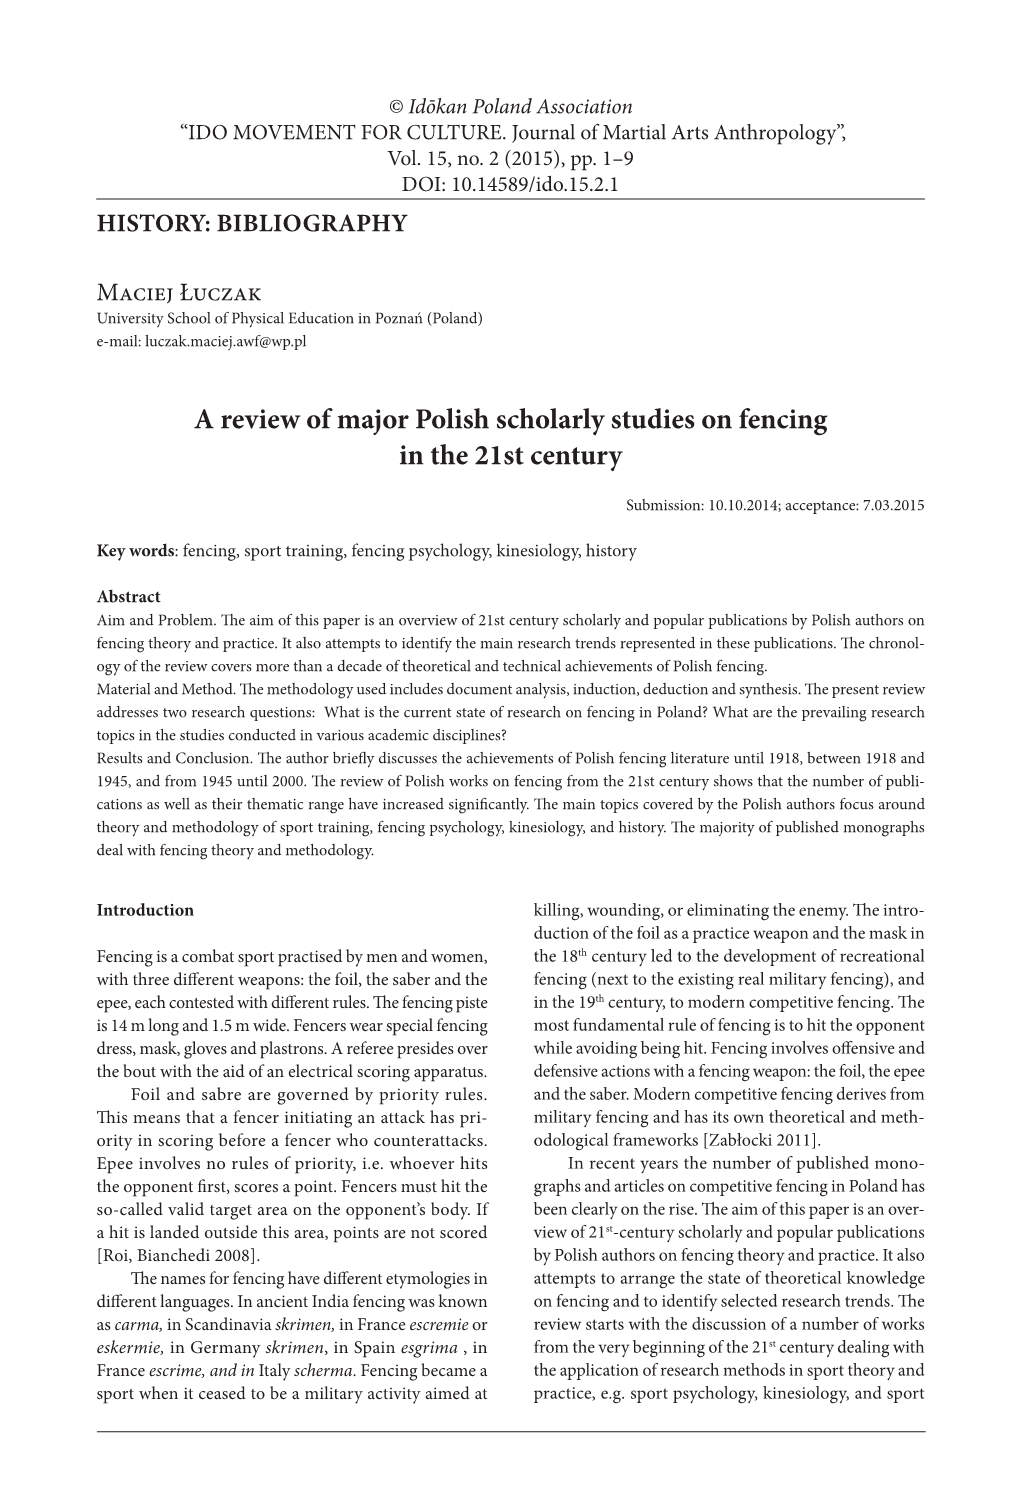 A Review of Major Polish Scholarly Studies on Fencing in the 21St Century